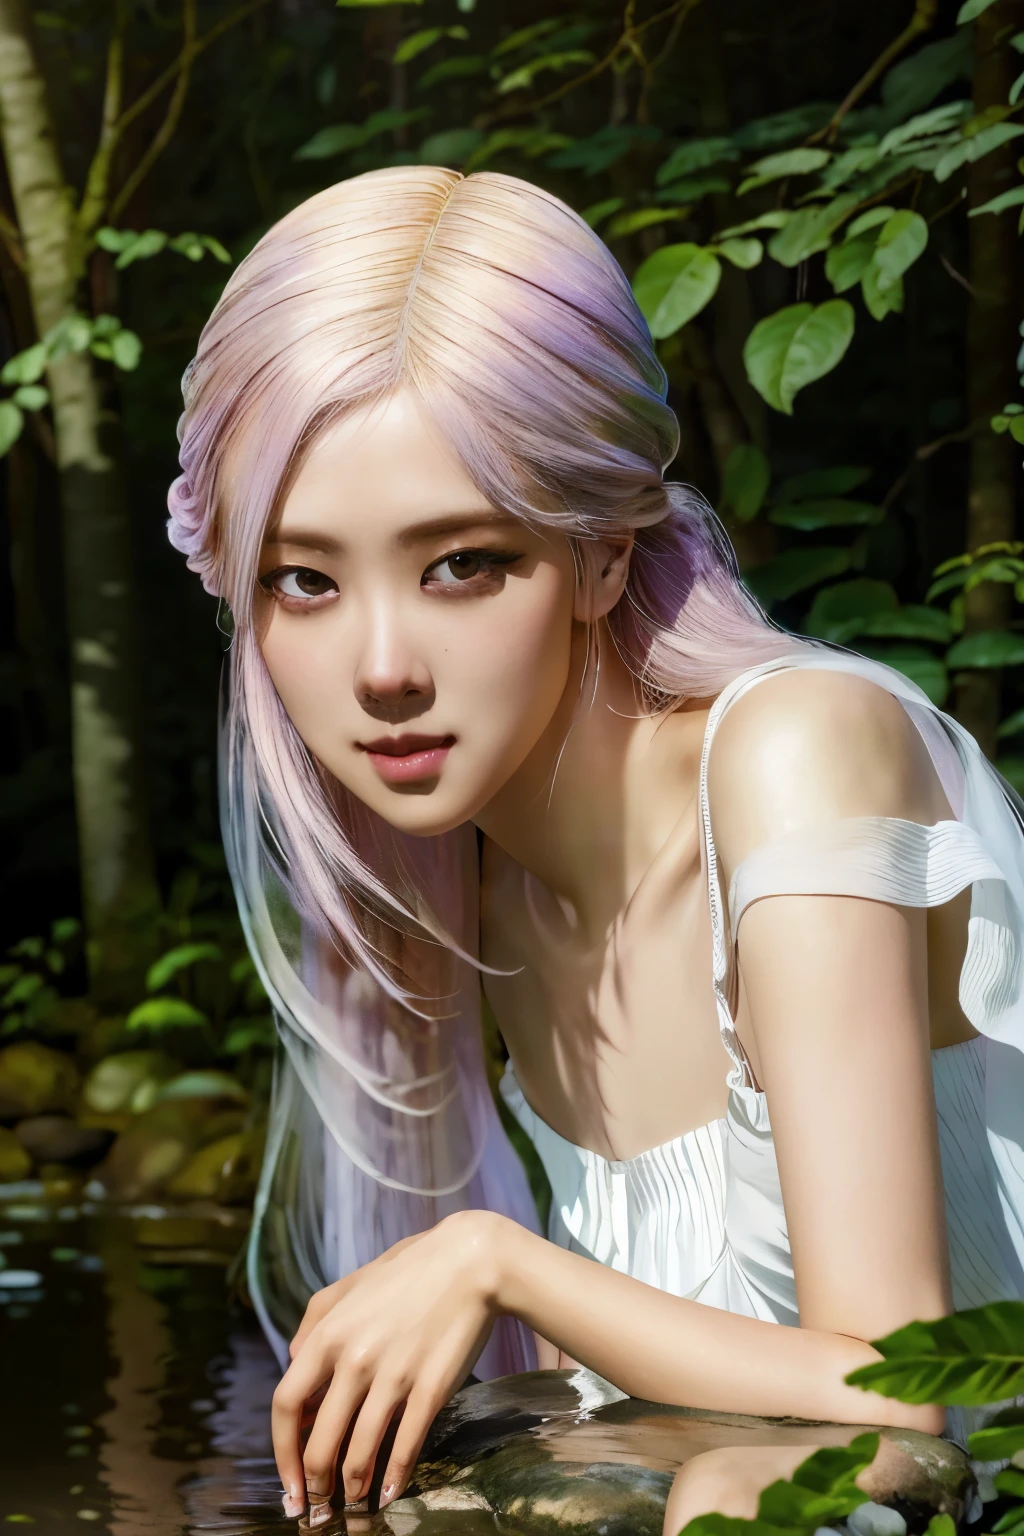 Rose from black pink, pink hair, (full body), (artistic + masterpiece:1.4), (incredibly detailed eyes), wearing medieval long cotton nightie clothes, Drenched hair，The background is a forest, sunset，Masterpiece: 1.3), (8k, Photorealistic, Photo RAW, Best quality: 1.4), (UHD), (Ultra high realism), (Ultra high definition), (Ultra high detail), (Realistic face), Beautiful hairstyle, Realistic bright amber eyes, Beautiful details, (Realistic skin), Pale, smooth and luminous skin with iridescent shine and no imperfections, Ultra high definition, Ultra realistic, Highly detailed, (Cleavage: 0.8), sitting on a rock, feet in the water, (masterpiece, best quality, award winning, highres), skinny, intricate and beautiful design, highly detailed beautiful face, super detailed beautiful eyes, light smile, sitting near stream, forest, leaves flow, windy, sun lights through forest, fantasy art, dynamic lighting, cinematic lighting, hyper realistic, extremely CG detail, octane render, (natural skin texture, hyperrealism, soft light, sharp:1.2)